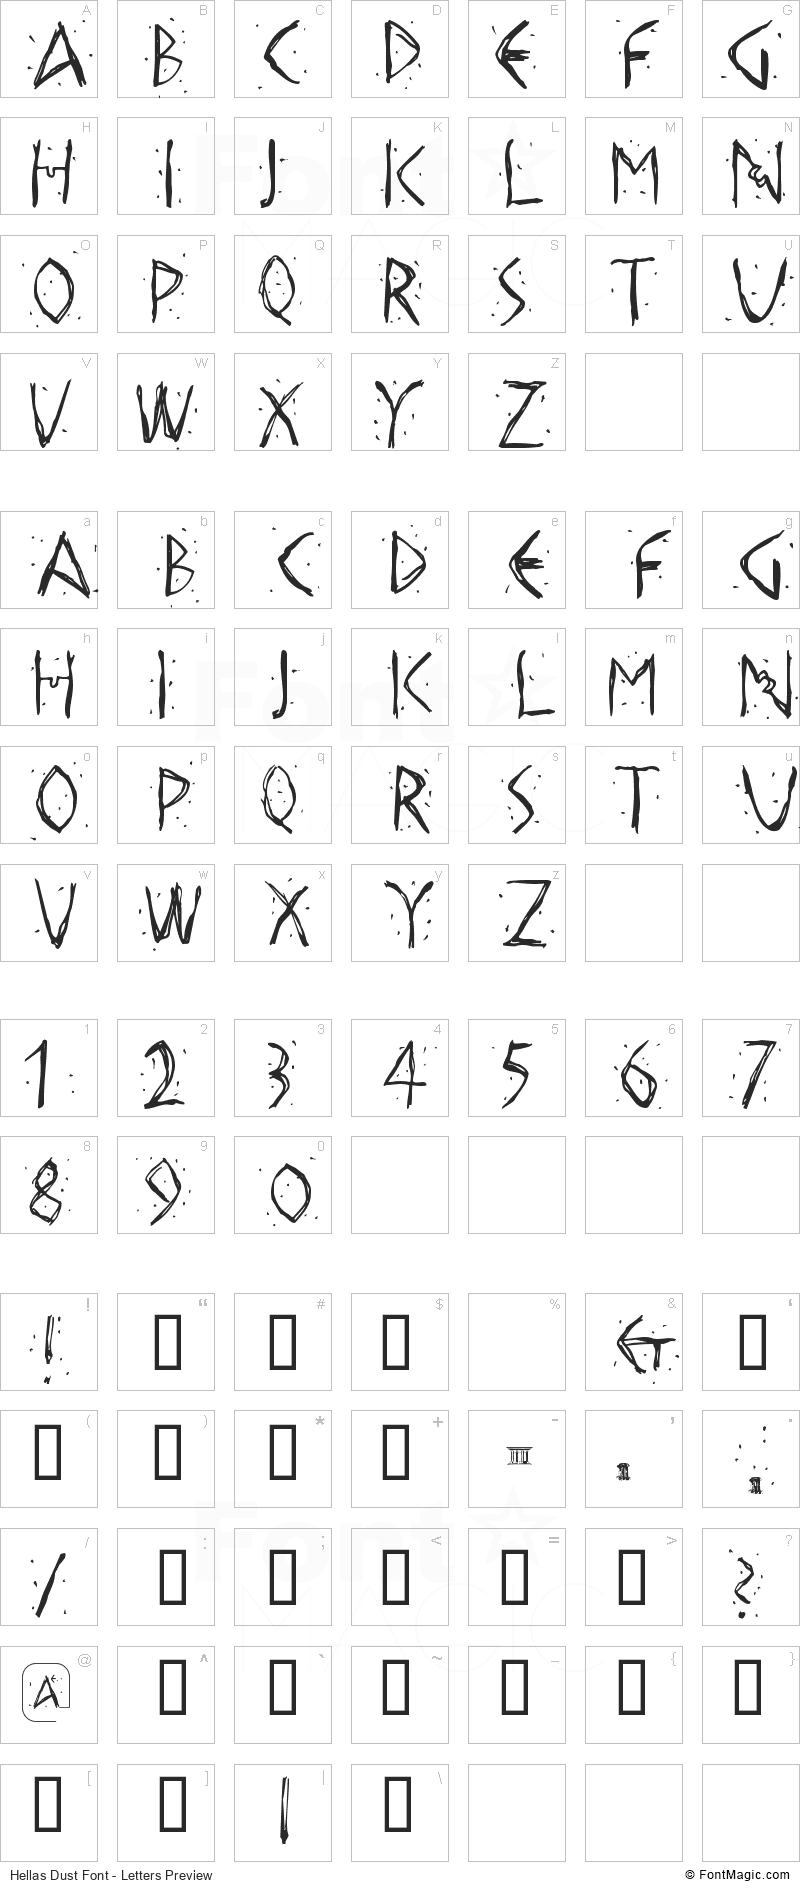 Hellas Dust Font - All Latters Preview Chart